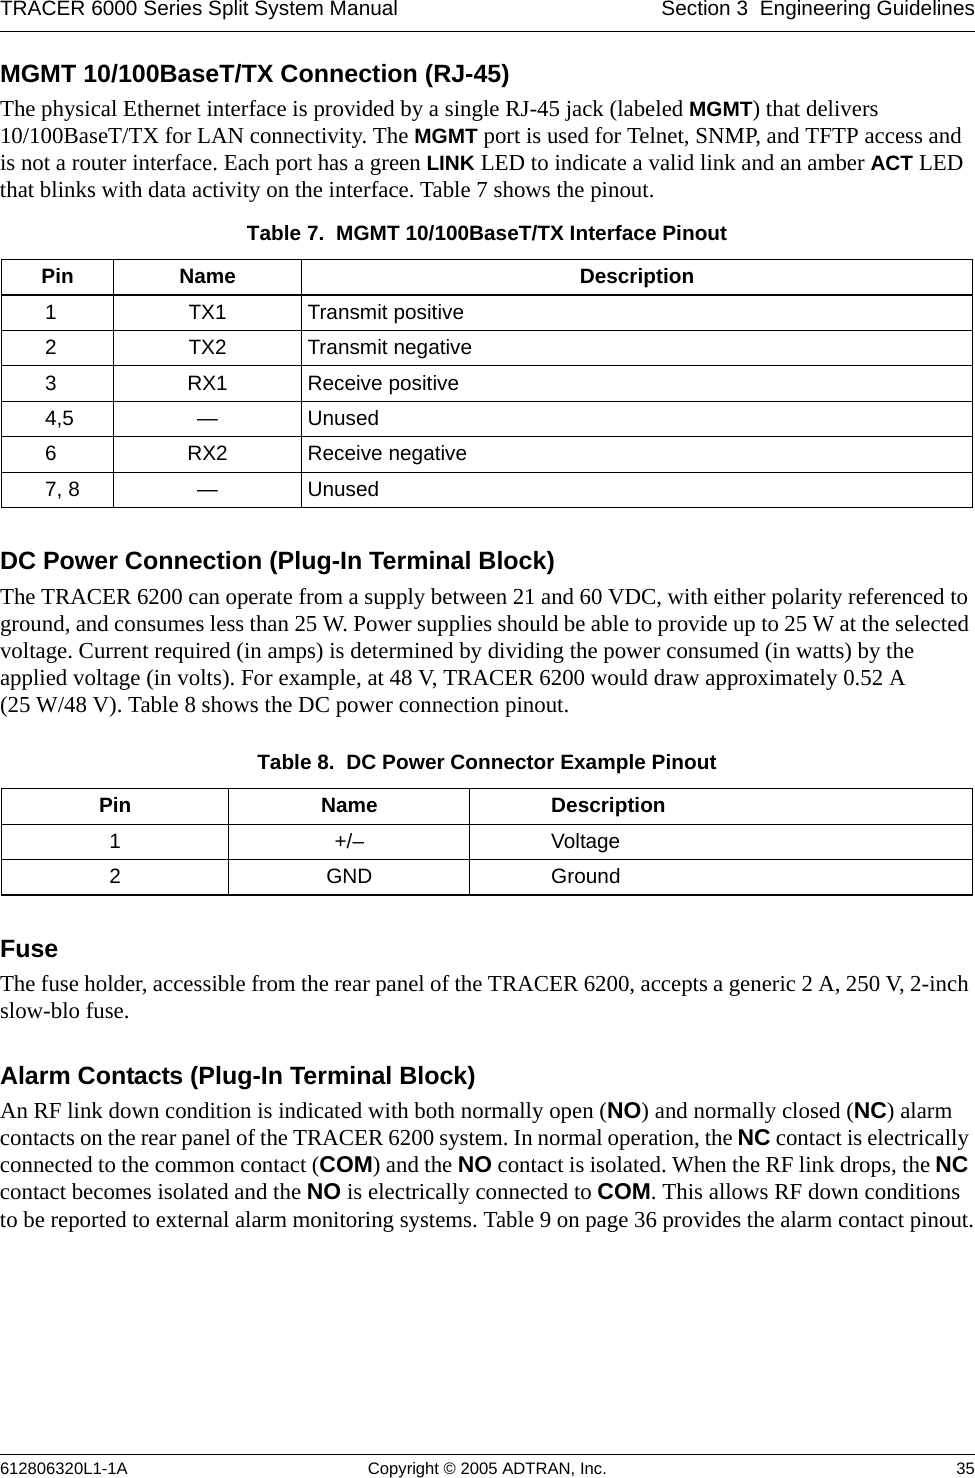 TRACER 6000 Series Split System Manual Section 3  Engineering Guidelines612806320L1-1A Copyright © 2005 ADTRAN, Inc. 35MGMT 10/100BaseT/TX Connection (RJ-45)The physical Ethernet interface is provided by a single RJ-45 jack (labeled MGMT) that delivers 10/100BaseT/TX for LAN connectivity. The MGMT port is used for Telnet, SNMP, and TFTP access and is not a router interface. Each port has a green LINK LED to indicate a valid link and an amber ACT LED that blinks with data activity on the interface. Table 7 shows the pinout.DC Power Connection (Plug-In Terminal Block)The TRACER 6200 can operate from a supply between 21 and 60 VDC, with either polarity referenced to ground, and consumes less than 25 W. Power supplies should be able to provide up to 25 W at the selected voltage. Current required (in amps) is determined by dividing the power consumed (in watts) by the applied voltage (in volts). For example, at 48 V, TRACER 6200 would draw approximately 0.52 A (25 W/48 V). Table 8 shows the DC power connection pinout.FuseThe fuse holder, accessible from the rear panel of the TRACER 6200, accepts a generic 2 A, 250 V, 2-inch slow-blo fuse.Alarm Contacts (Plug-In Terminal Block)An RF link down condition is indicated with both normally open (NO) and normally closed (NC) alarm contacts on the rear panel of the TRACER 6200 system. In normal operation, the NC contact is electrically connected to the common contact (COM) and the NO contact is isolated. When the RF link drops, the NC contact becomes isolated and the NO is electrically connected to COM. This allows RF down conditions to be reported to external alarm monitoring systems. Table 9 on page 36 provides the alarm contact pinout.Table 7.  MGMT 10/100BaseT/TX Interface Pinout Pin Name Description1TX1 Transmit positive2TX2 Transmit negative3RX1 Receive positive4,5 —Unused6RX2 Receive negative7, 8 —UnusedTable 8.  DC Power Connector Example Pinout Pin Name Description1+/– Voltage2GND Ground